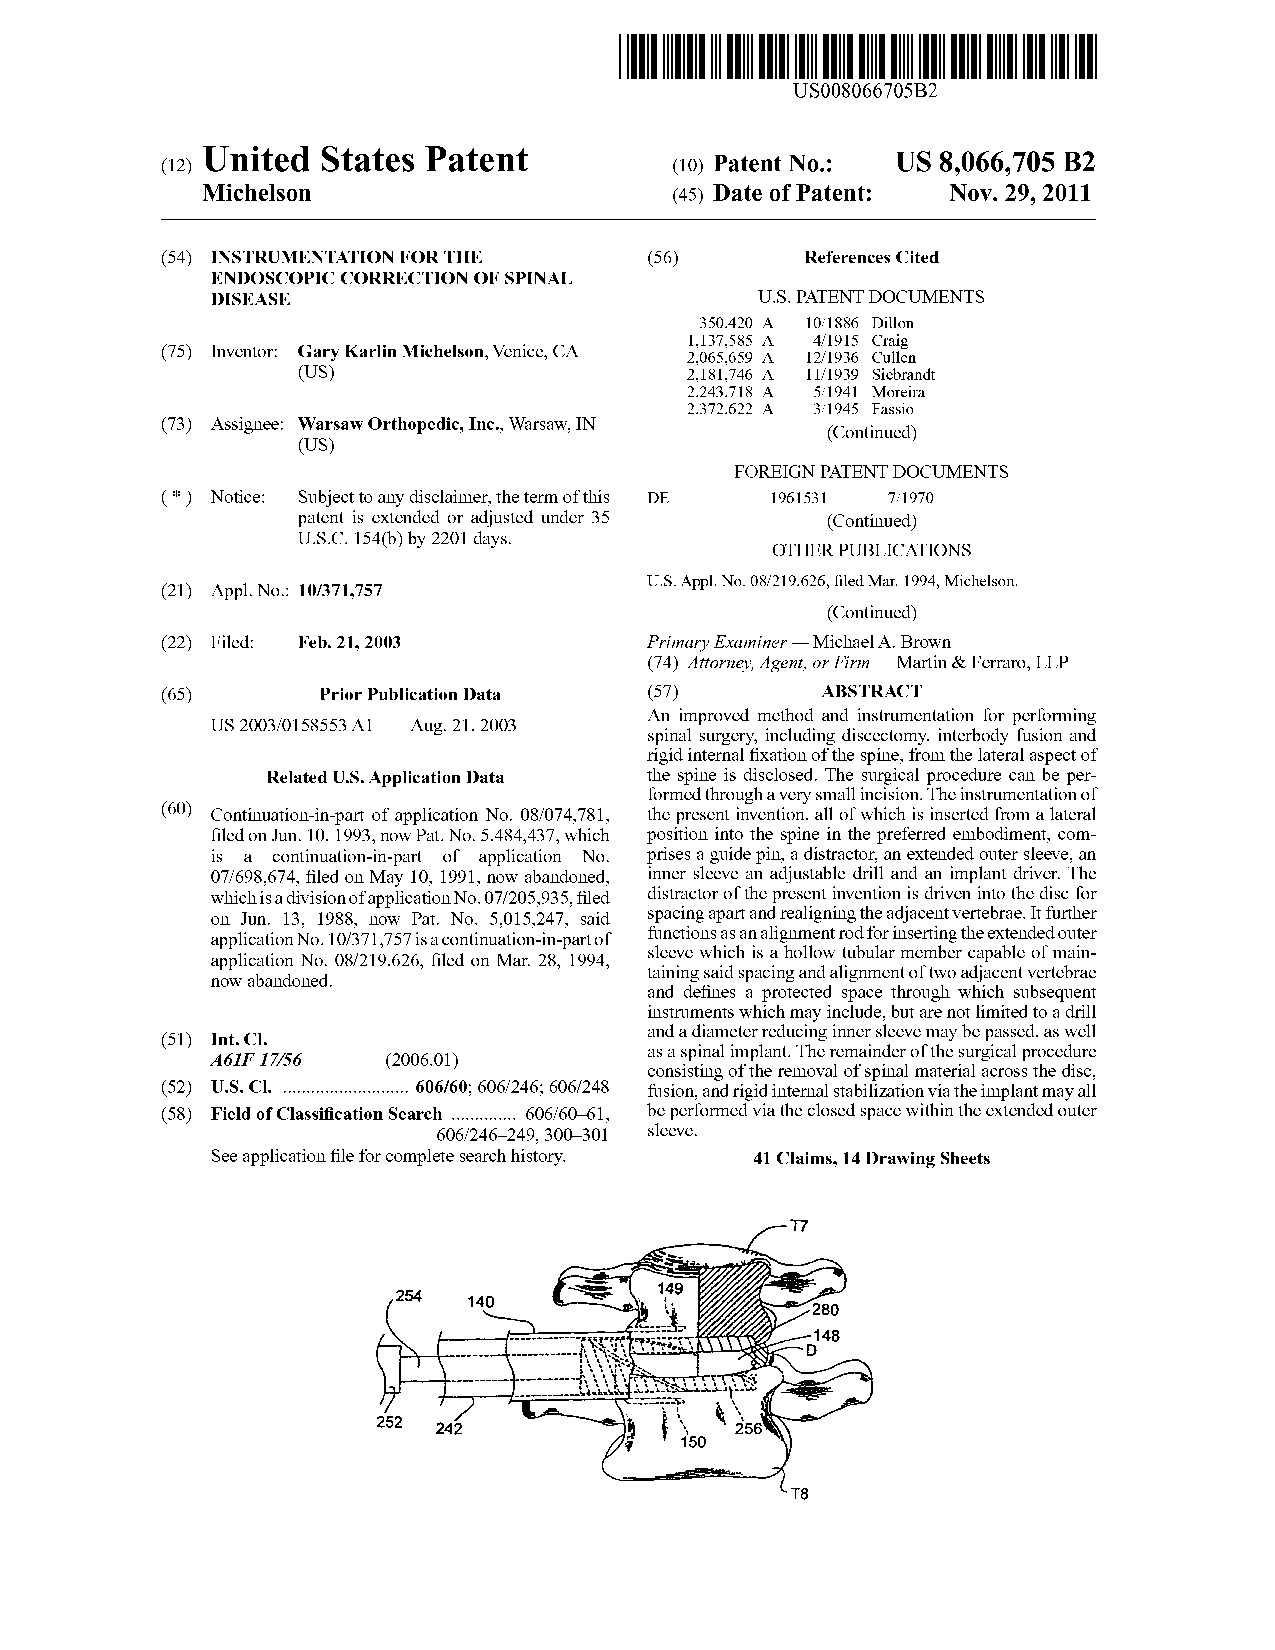 Instrumentation for the endoscopic correction of spinal disease - Patent 8,066,705